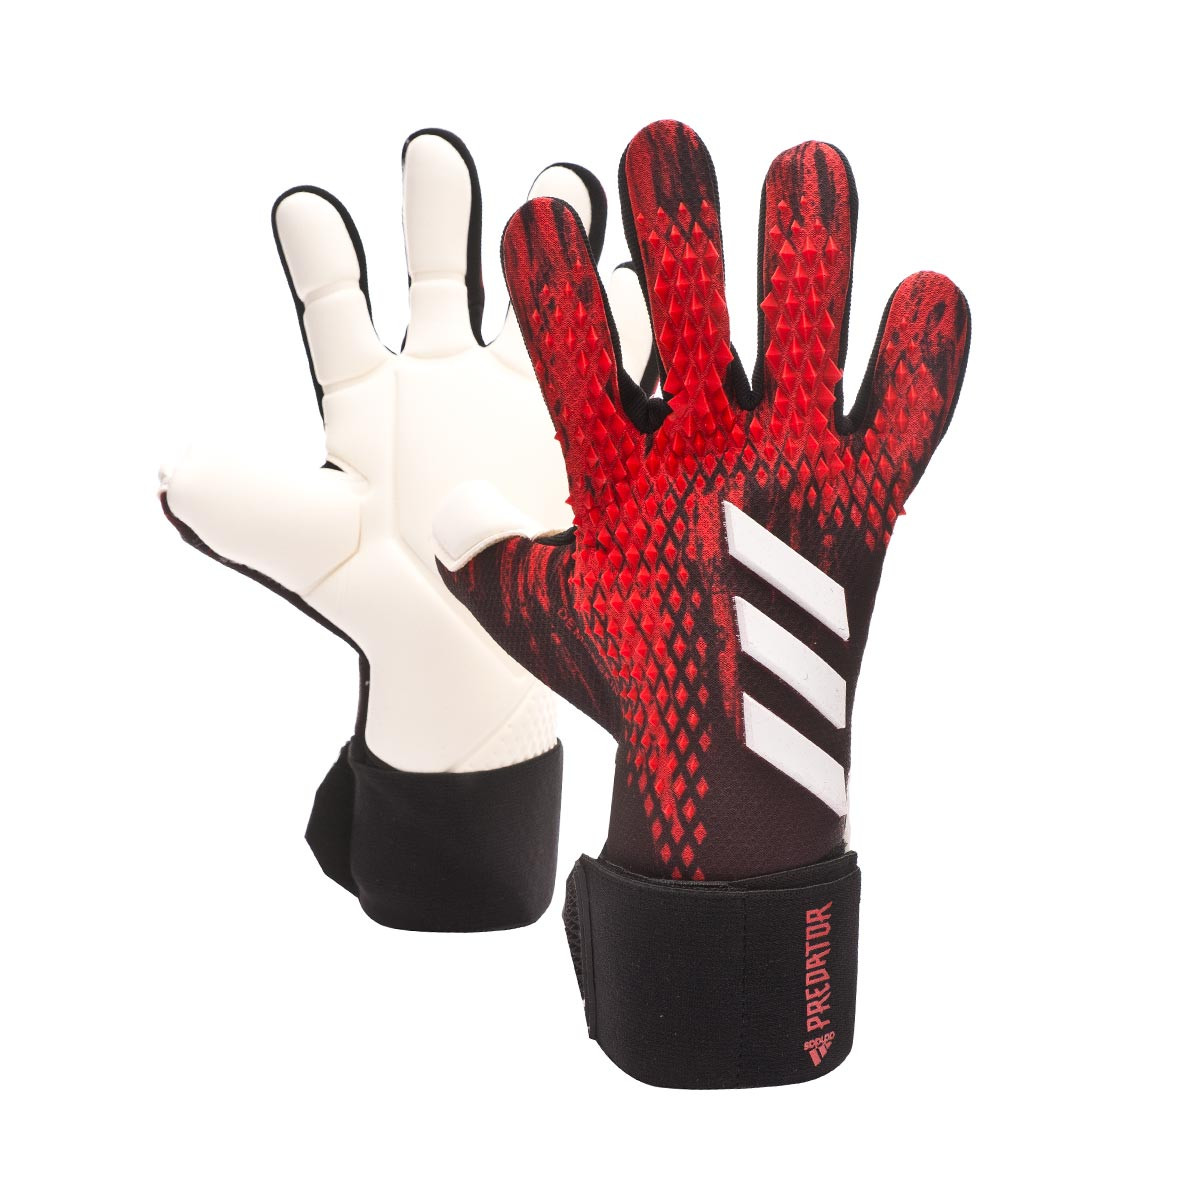 Glove adidas Predator Competition Black-Active red - Football store Fútbol  Emotion